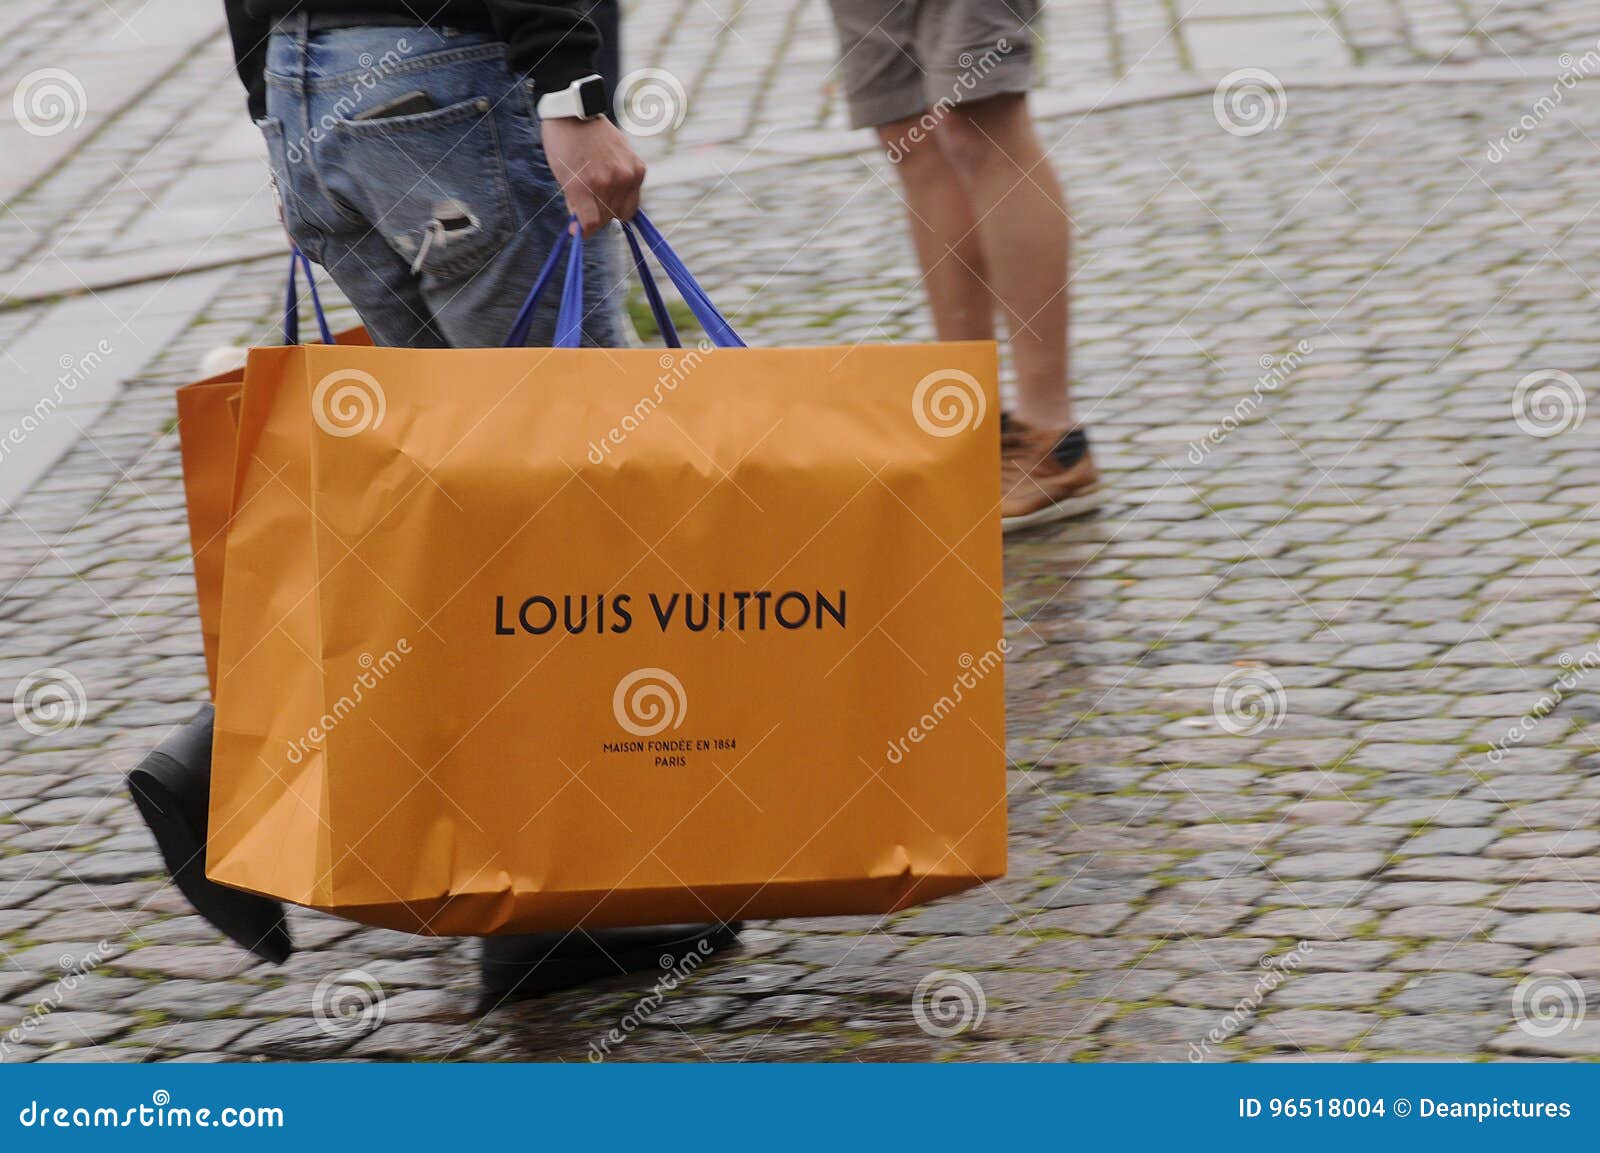 Consumer With Louis Vuitton Shopping Bags Editorial Stock Image - Image of denmark, images: 96518004